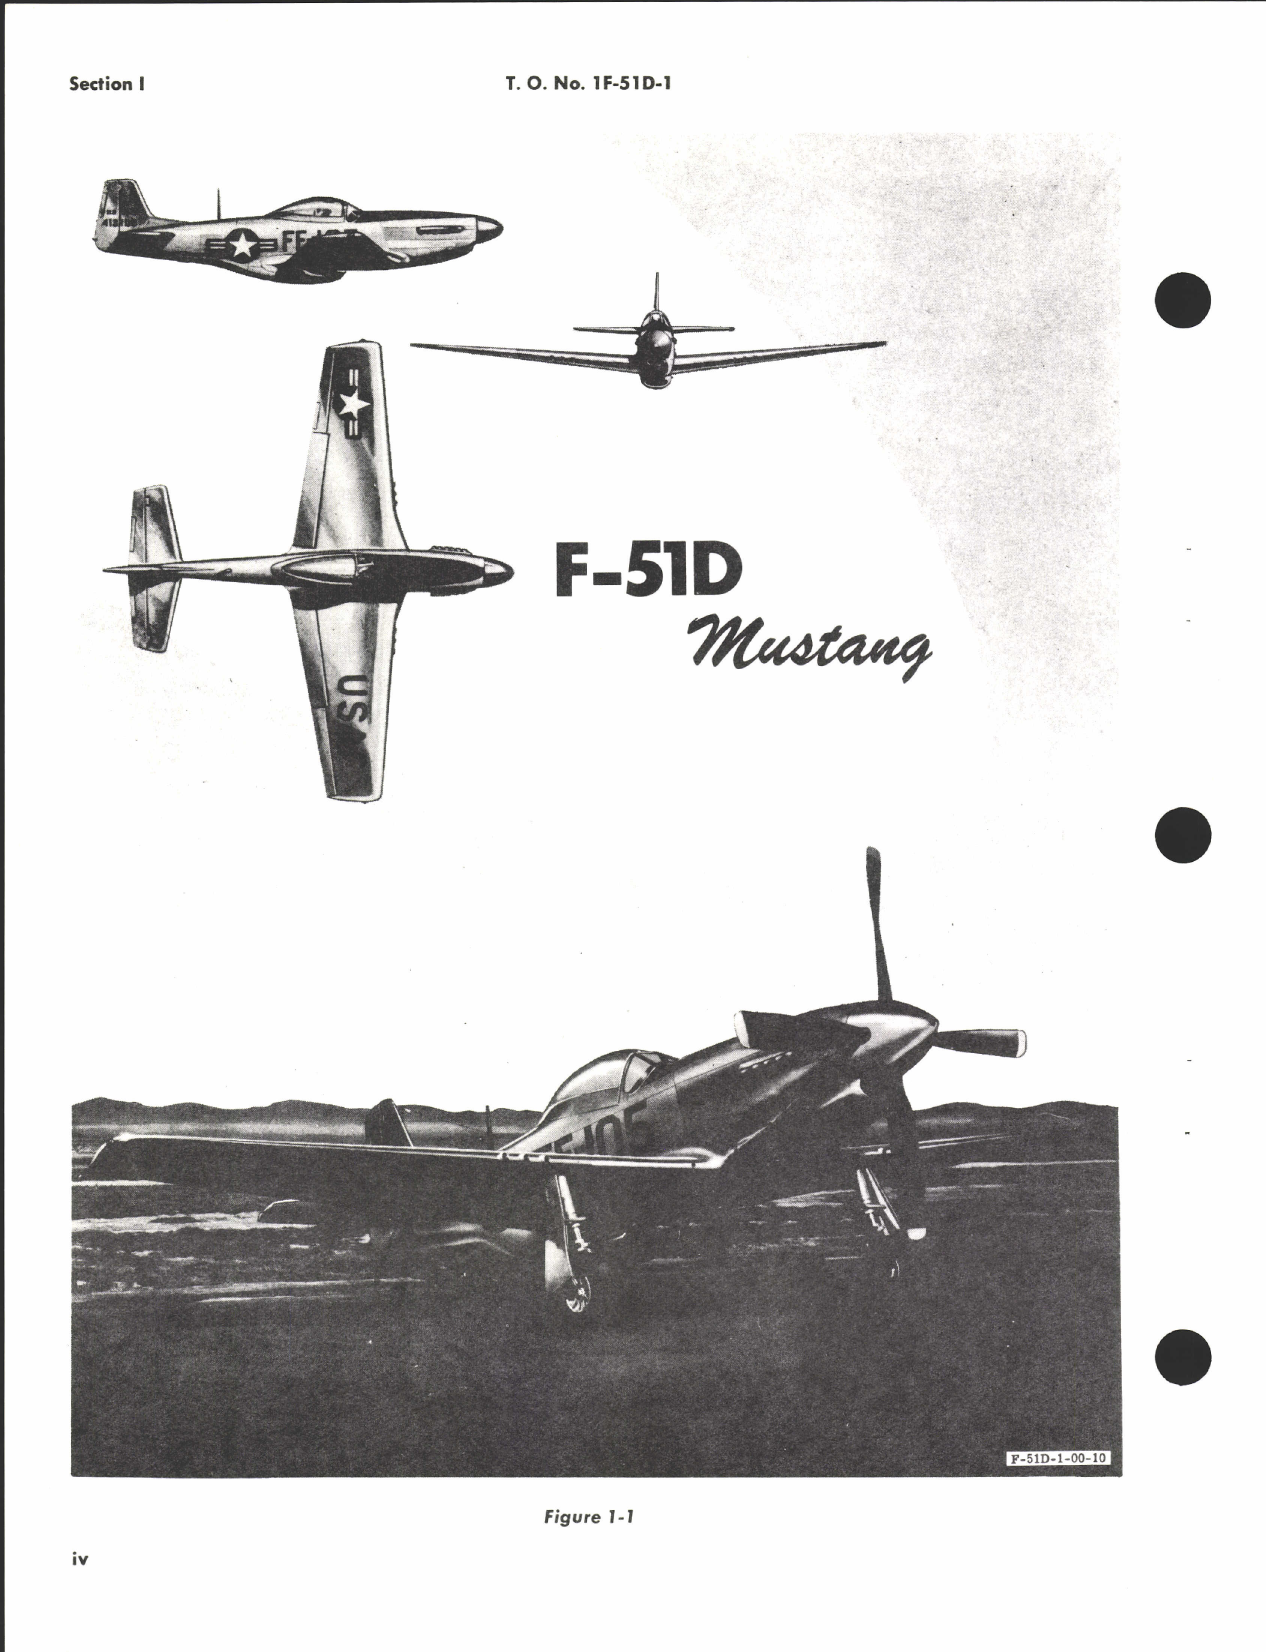 Sample page 6 from AirCorps Library document: Flight Handbook for F-51D